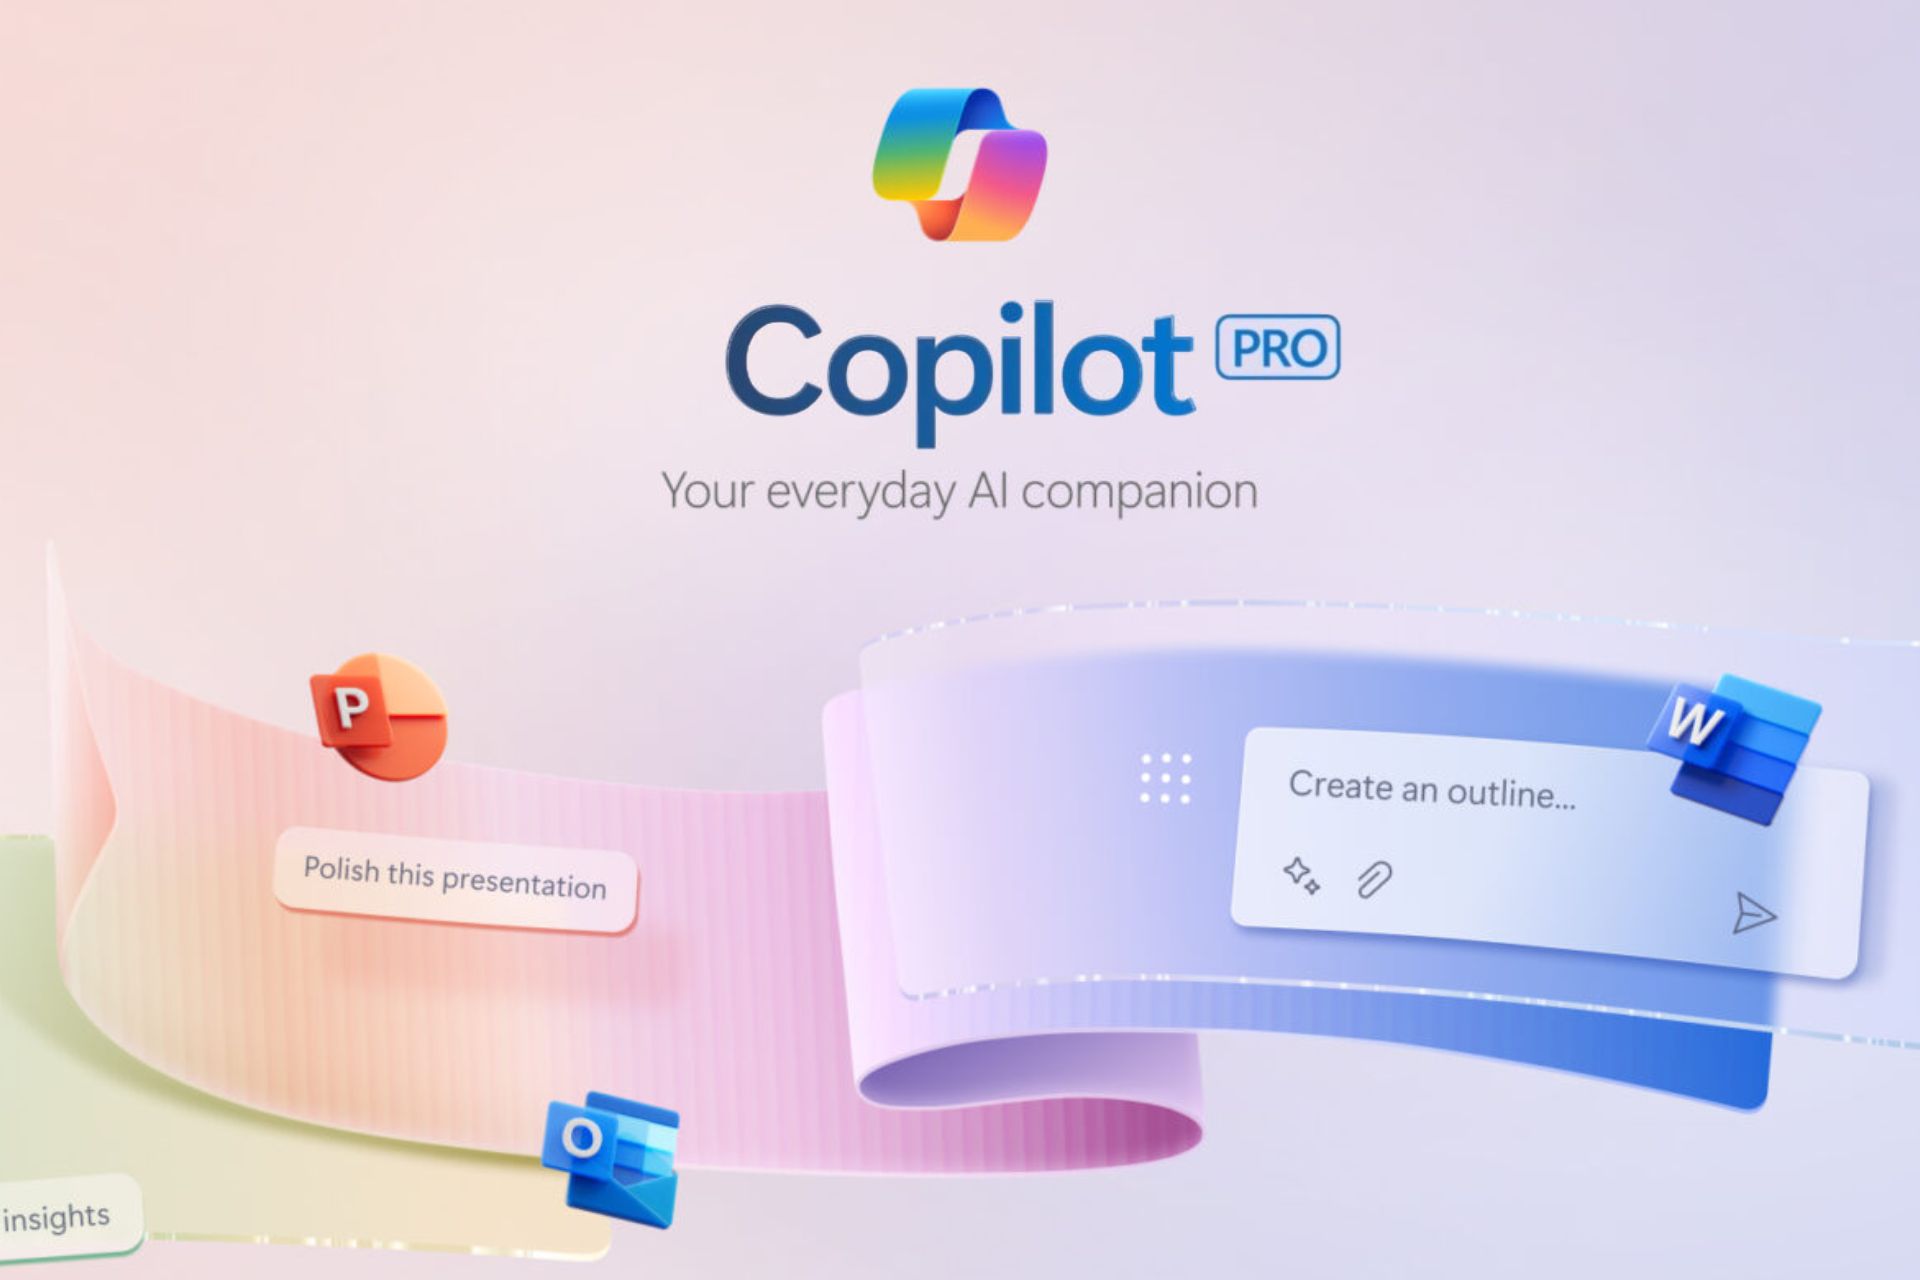 Copilot Pro is now available globally with one-month free trial